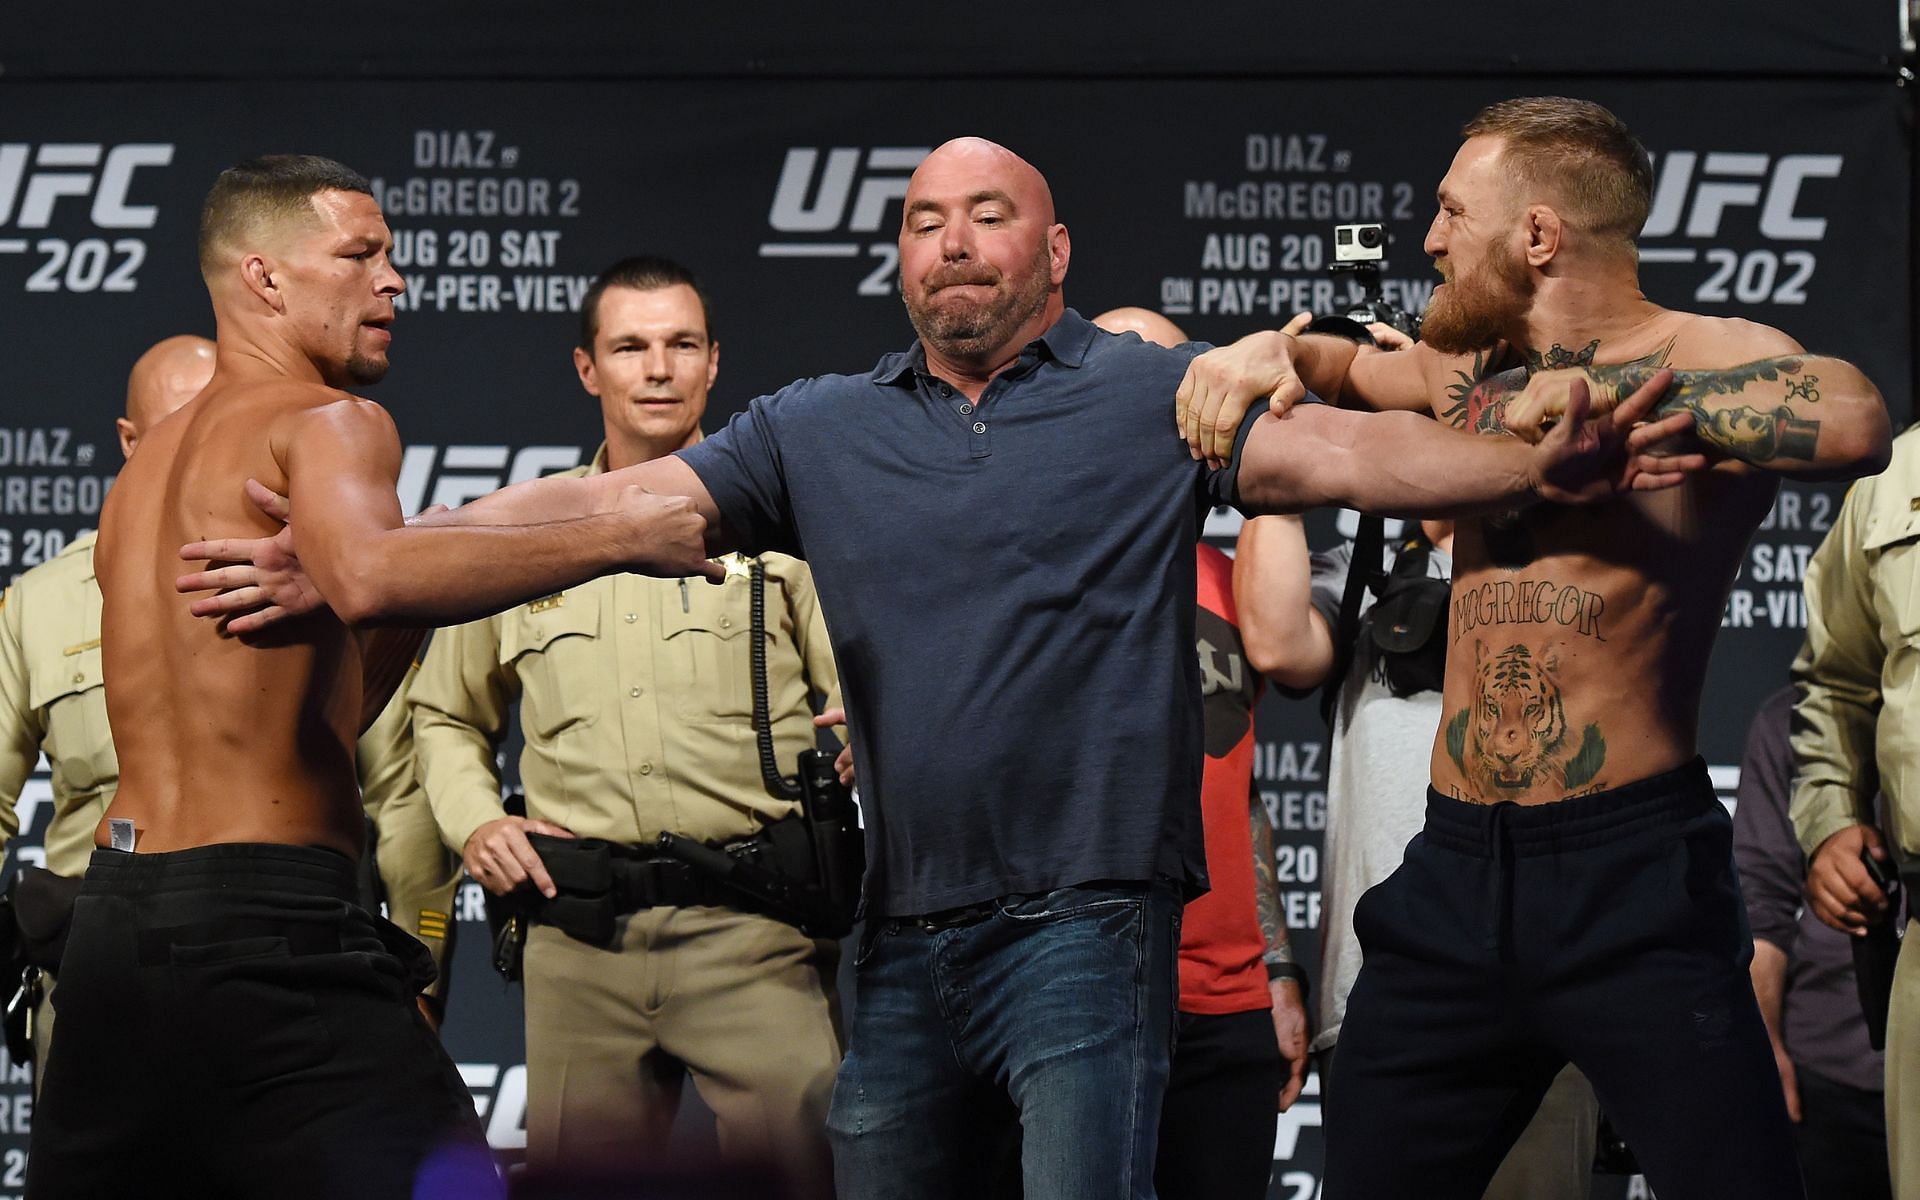 UFC president Dana White (center) separates Conor McGregor (right) and Nate Diaz (left) during the weigh-in ahead of their rematch